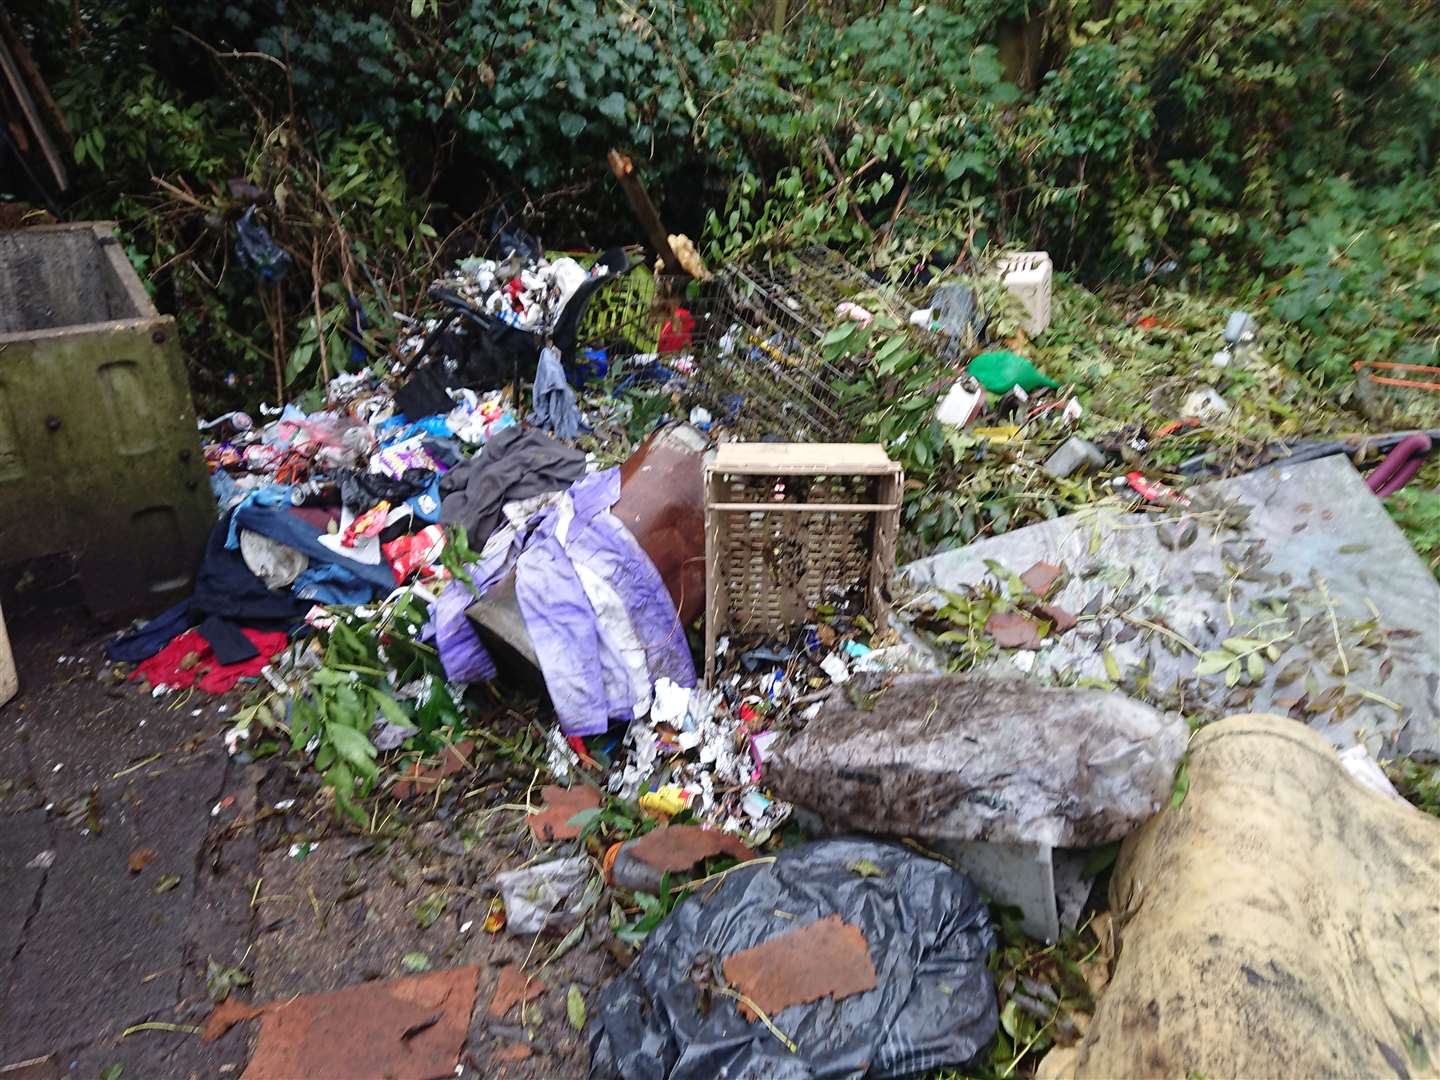 Rubbish was seen strewn in the overgrown garden behind the abandoned property a few years ago